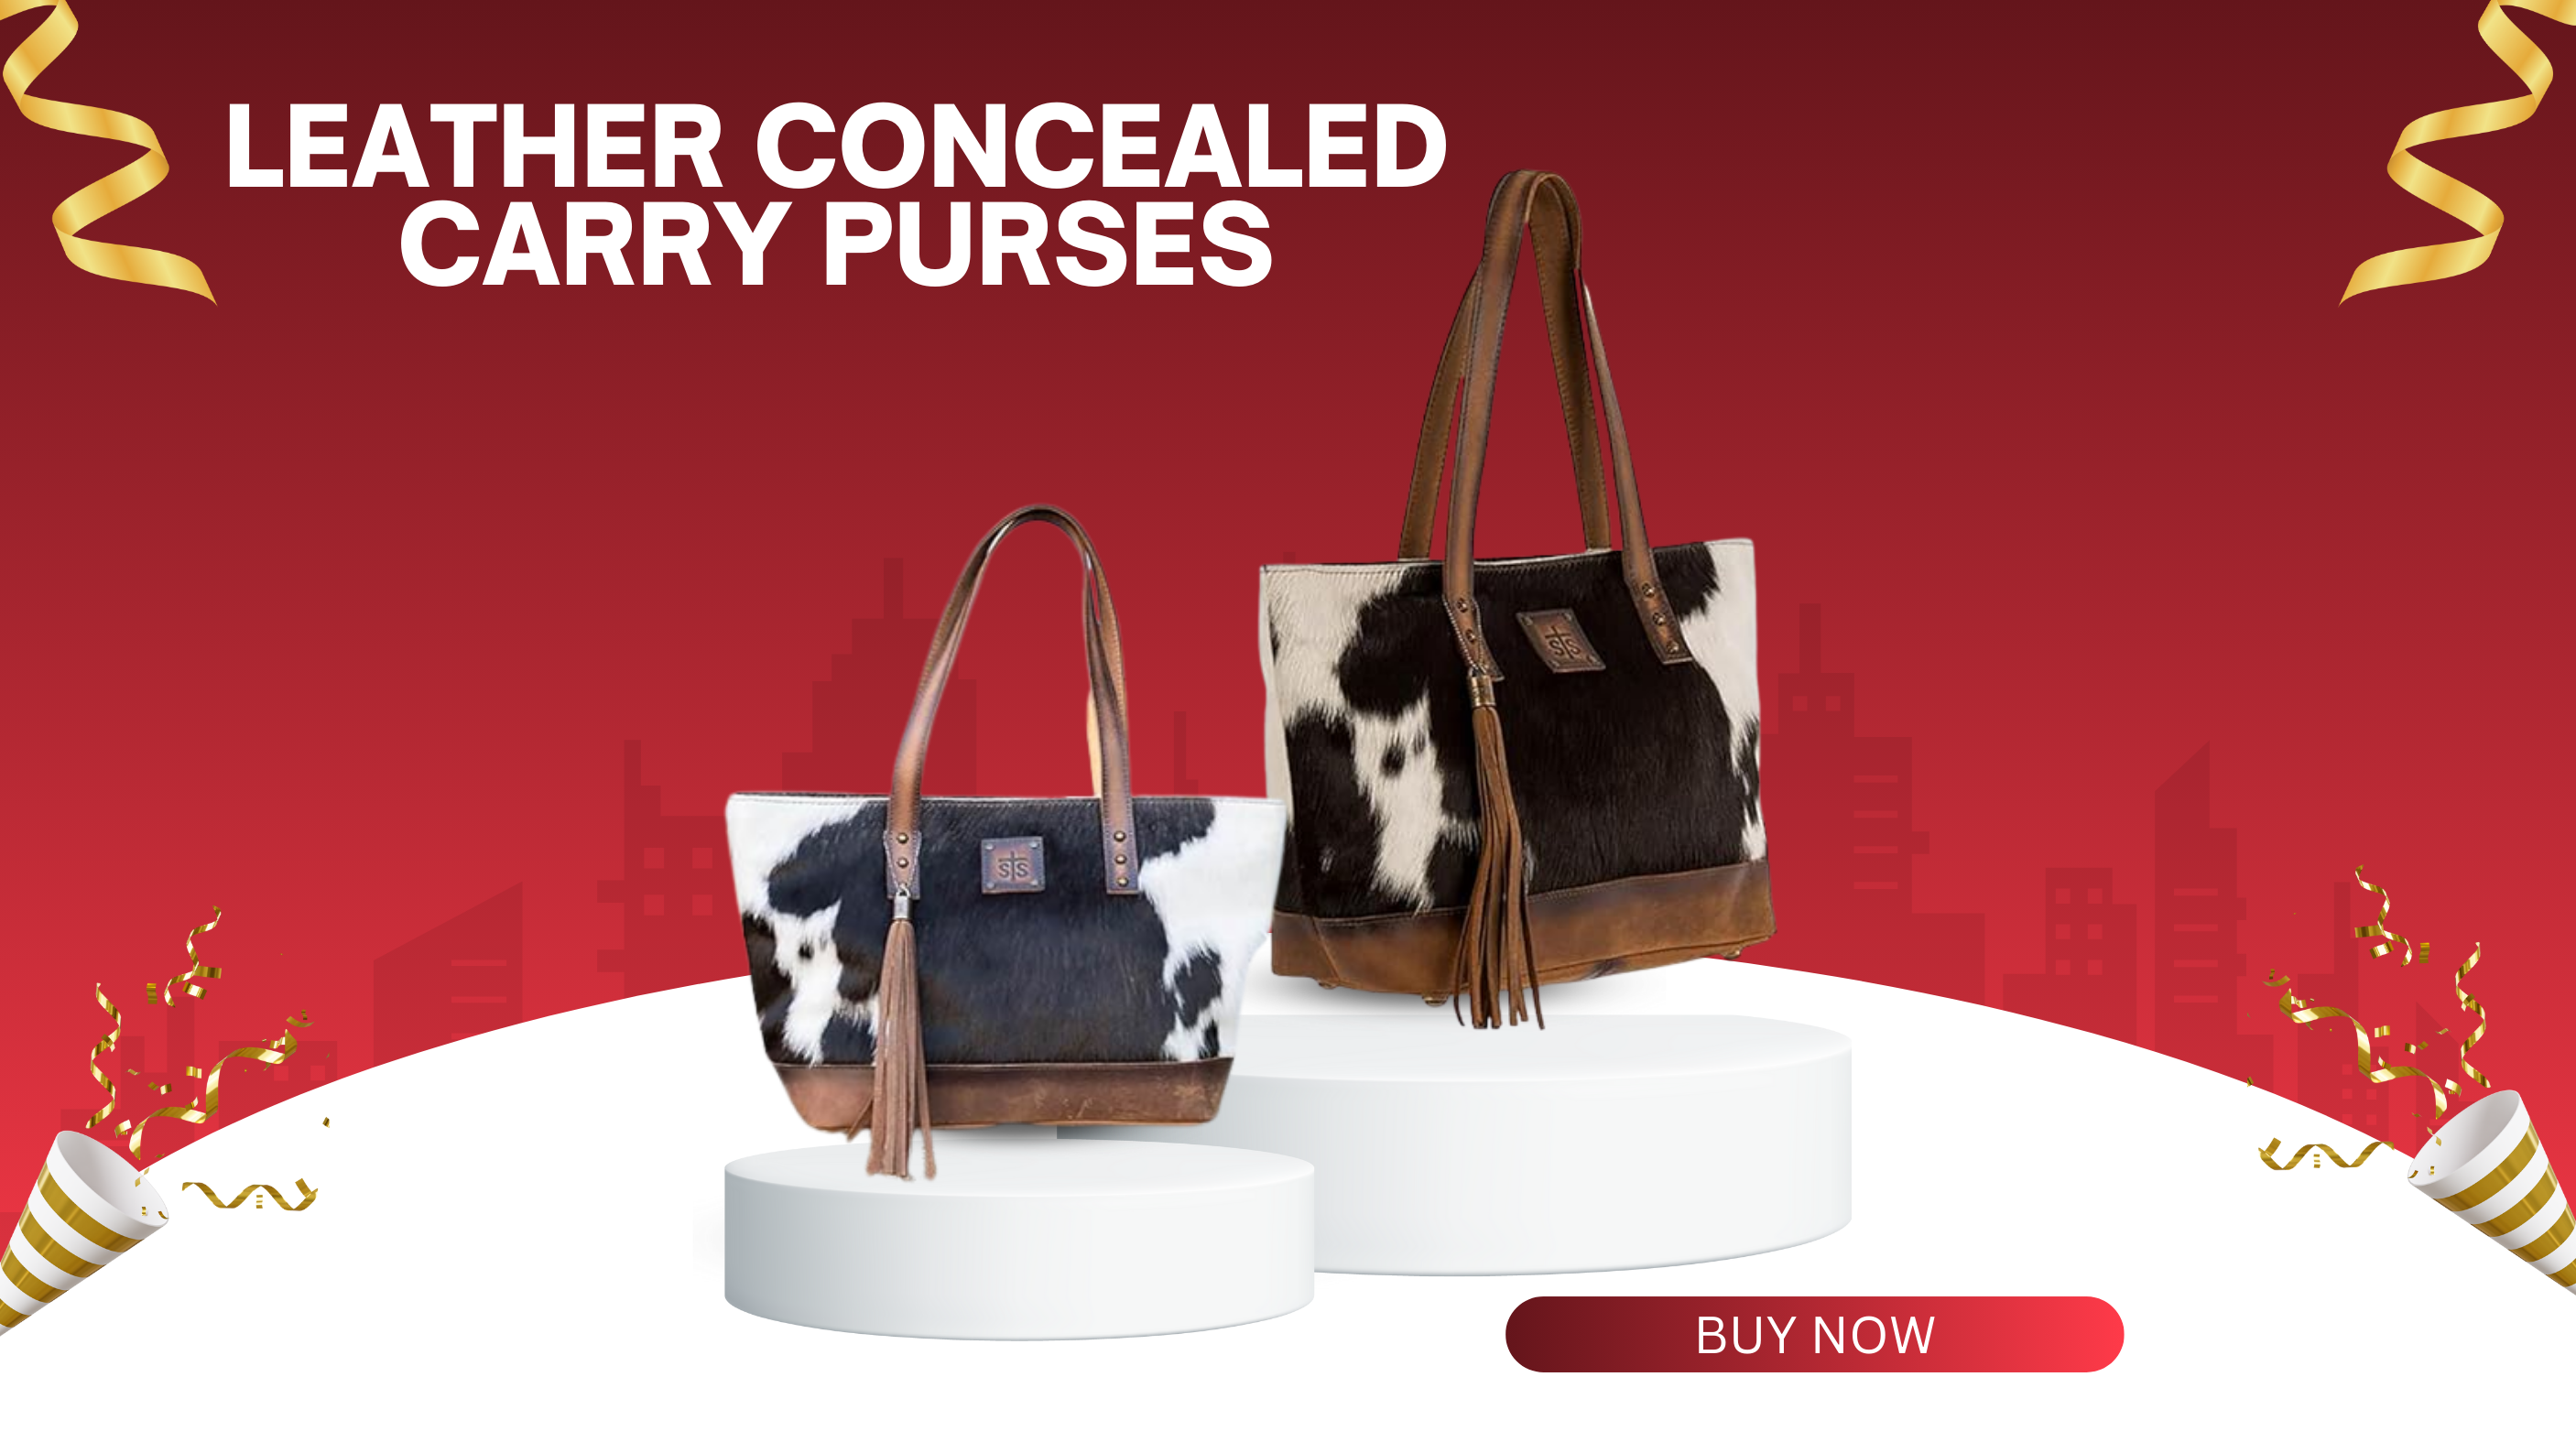 Leather Concealed Carry Purses